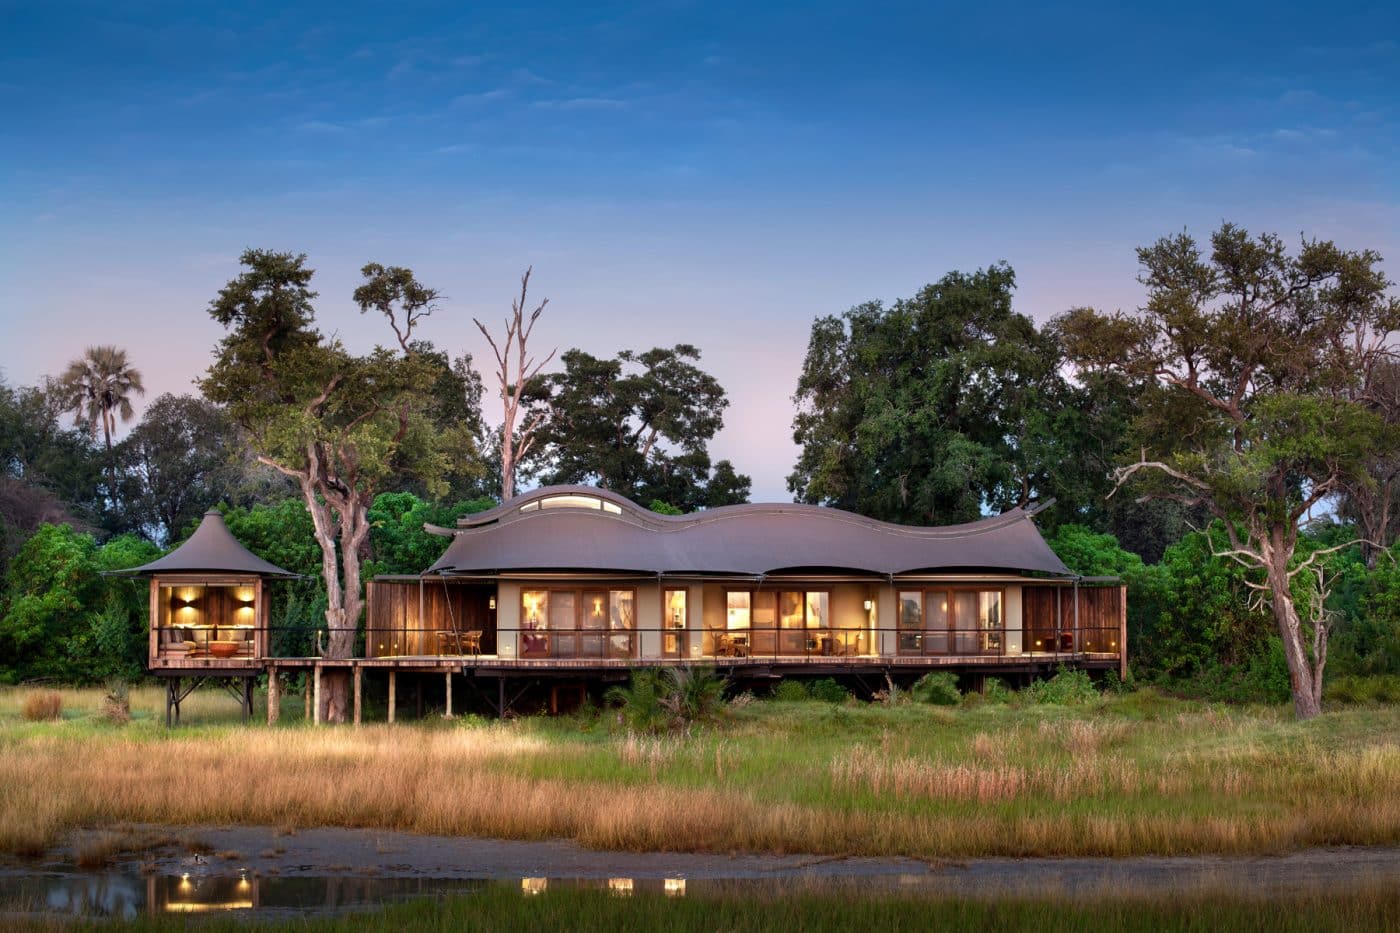 Architect Anton de Kock designed the entire Xigera Safari Lodge, including each of its 12 individually designed suites (an example of which appears above). He wanted the buildings to be in synergy with their surroundings, using torched timber cladding and undulating roofs inspired by the wingspan of the region’s rare Pel’s fishing owl. 